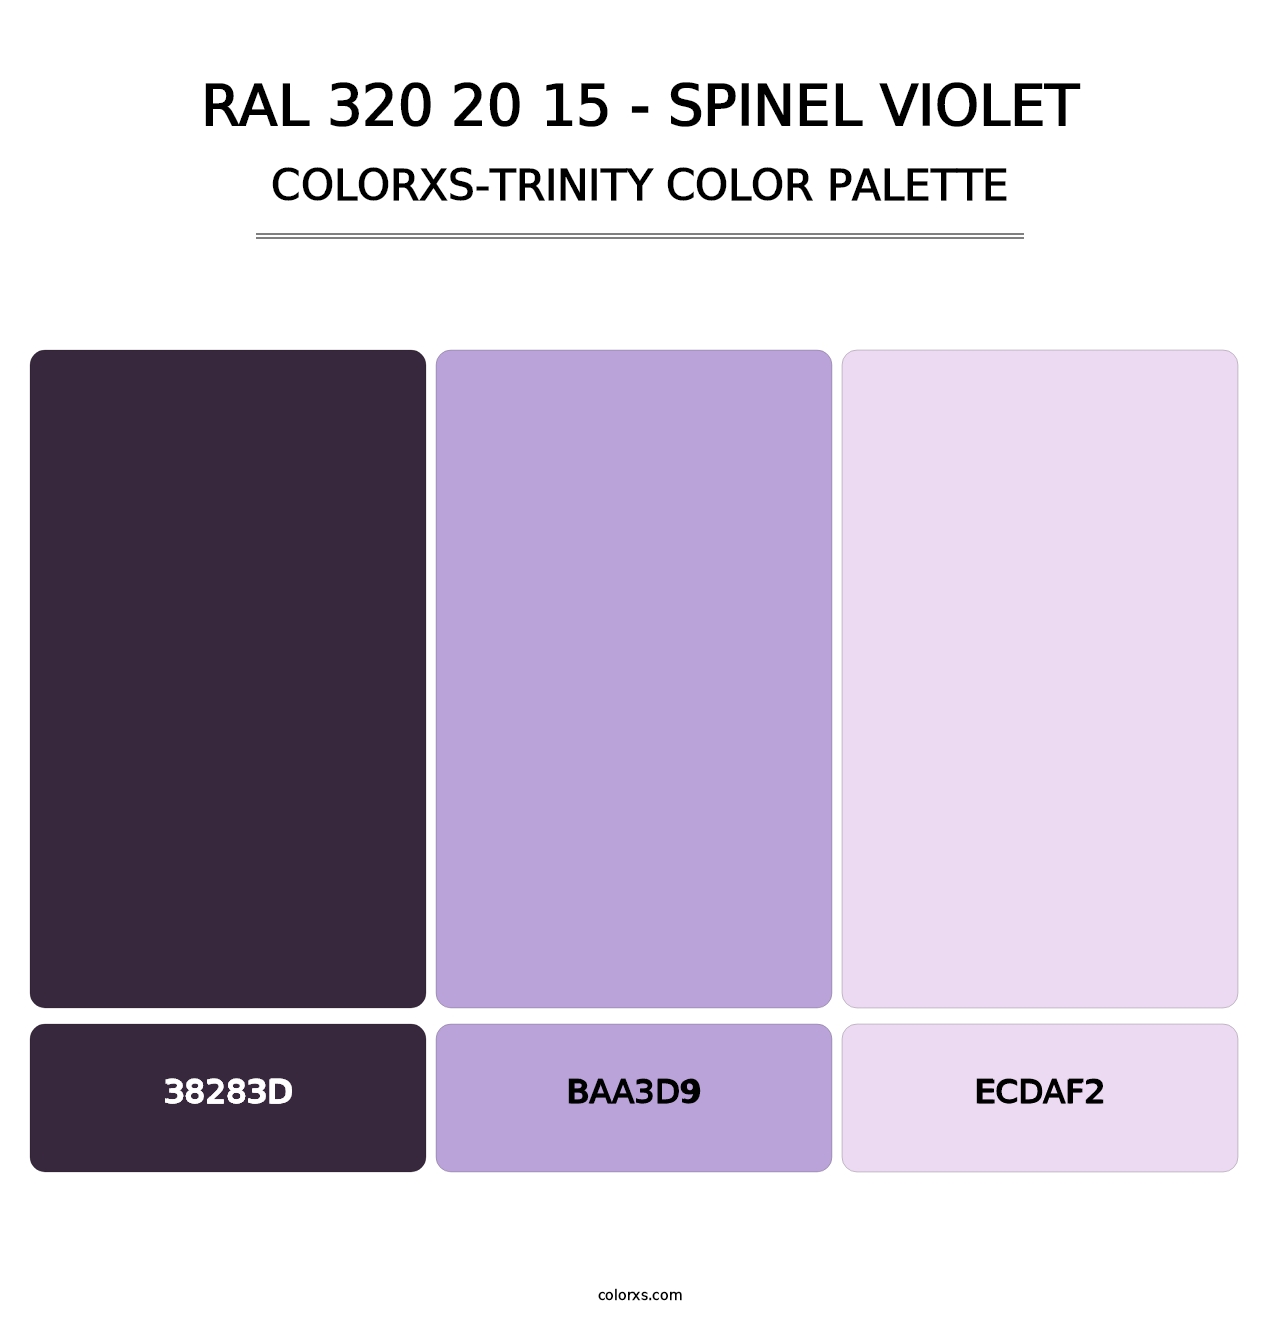 RAL 320 20 15 - Spinel Violet - Colorxs Trinity Palette